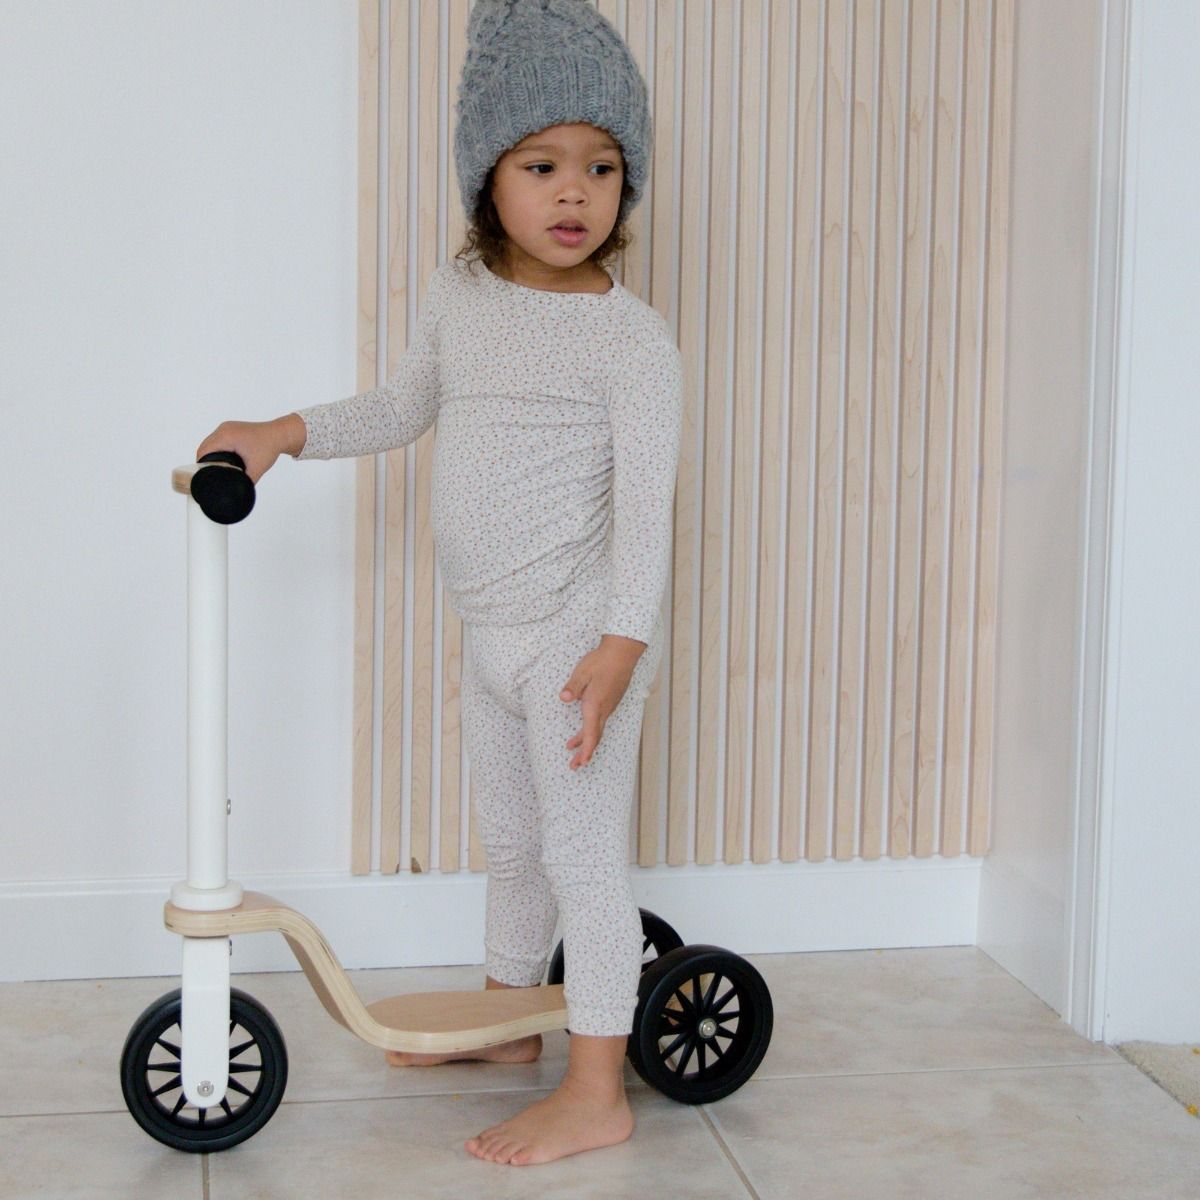 Wooden kinderfeets scooter. Quality wooden toys NZ